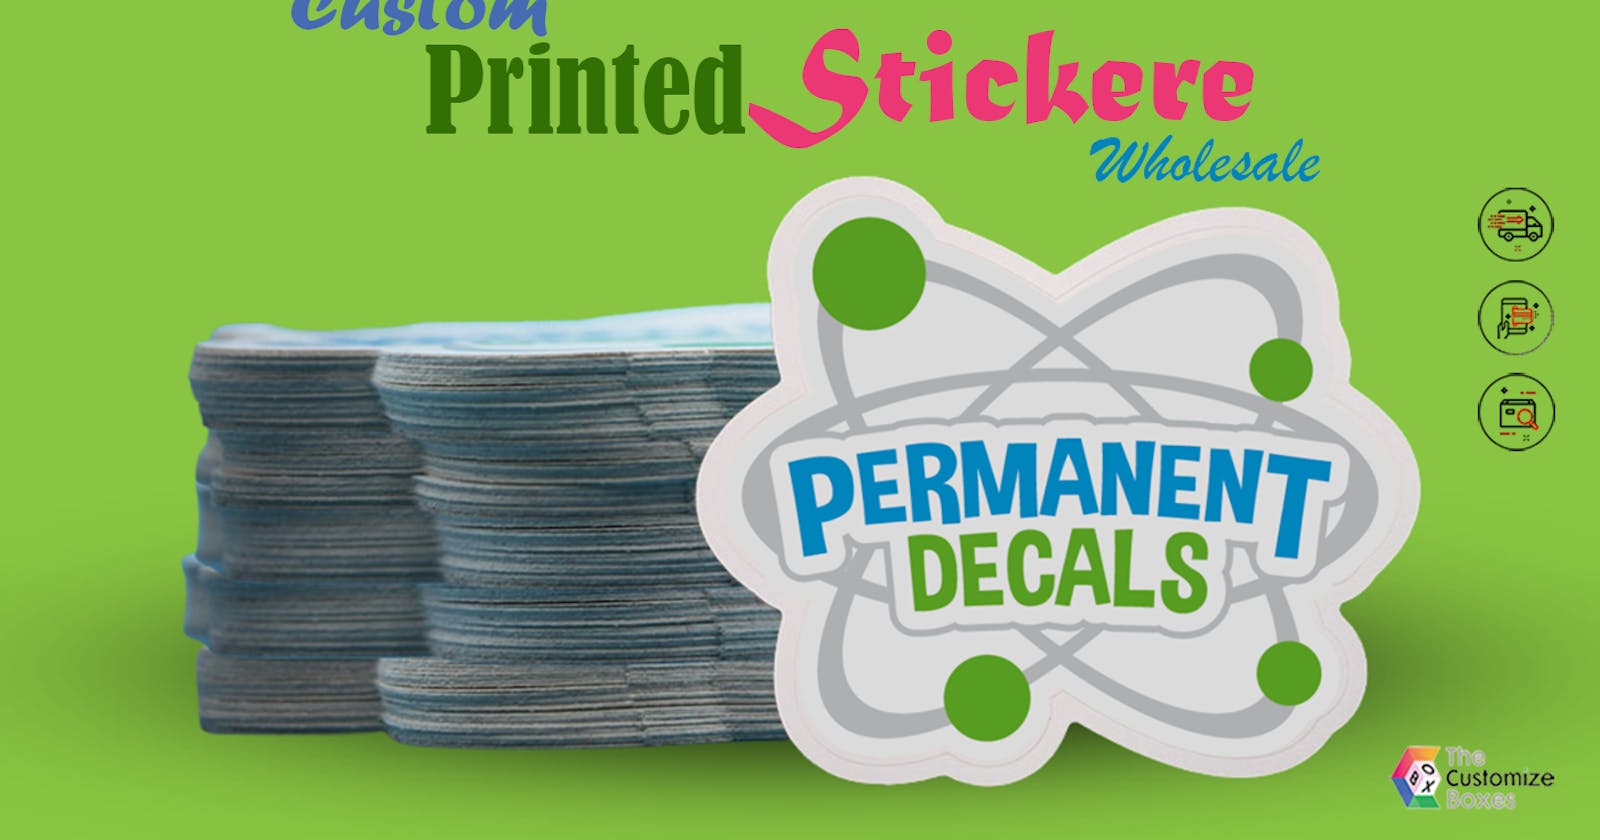 Reasons Why Should You Prefer Custom Printed Stickers Wholesale